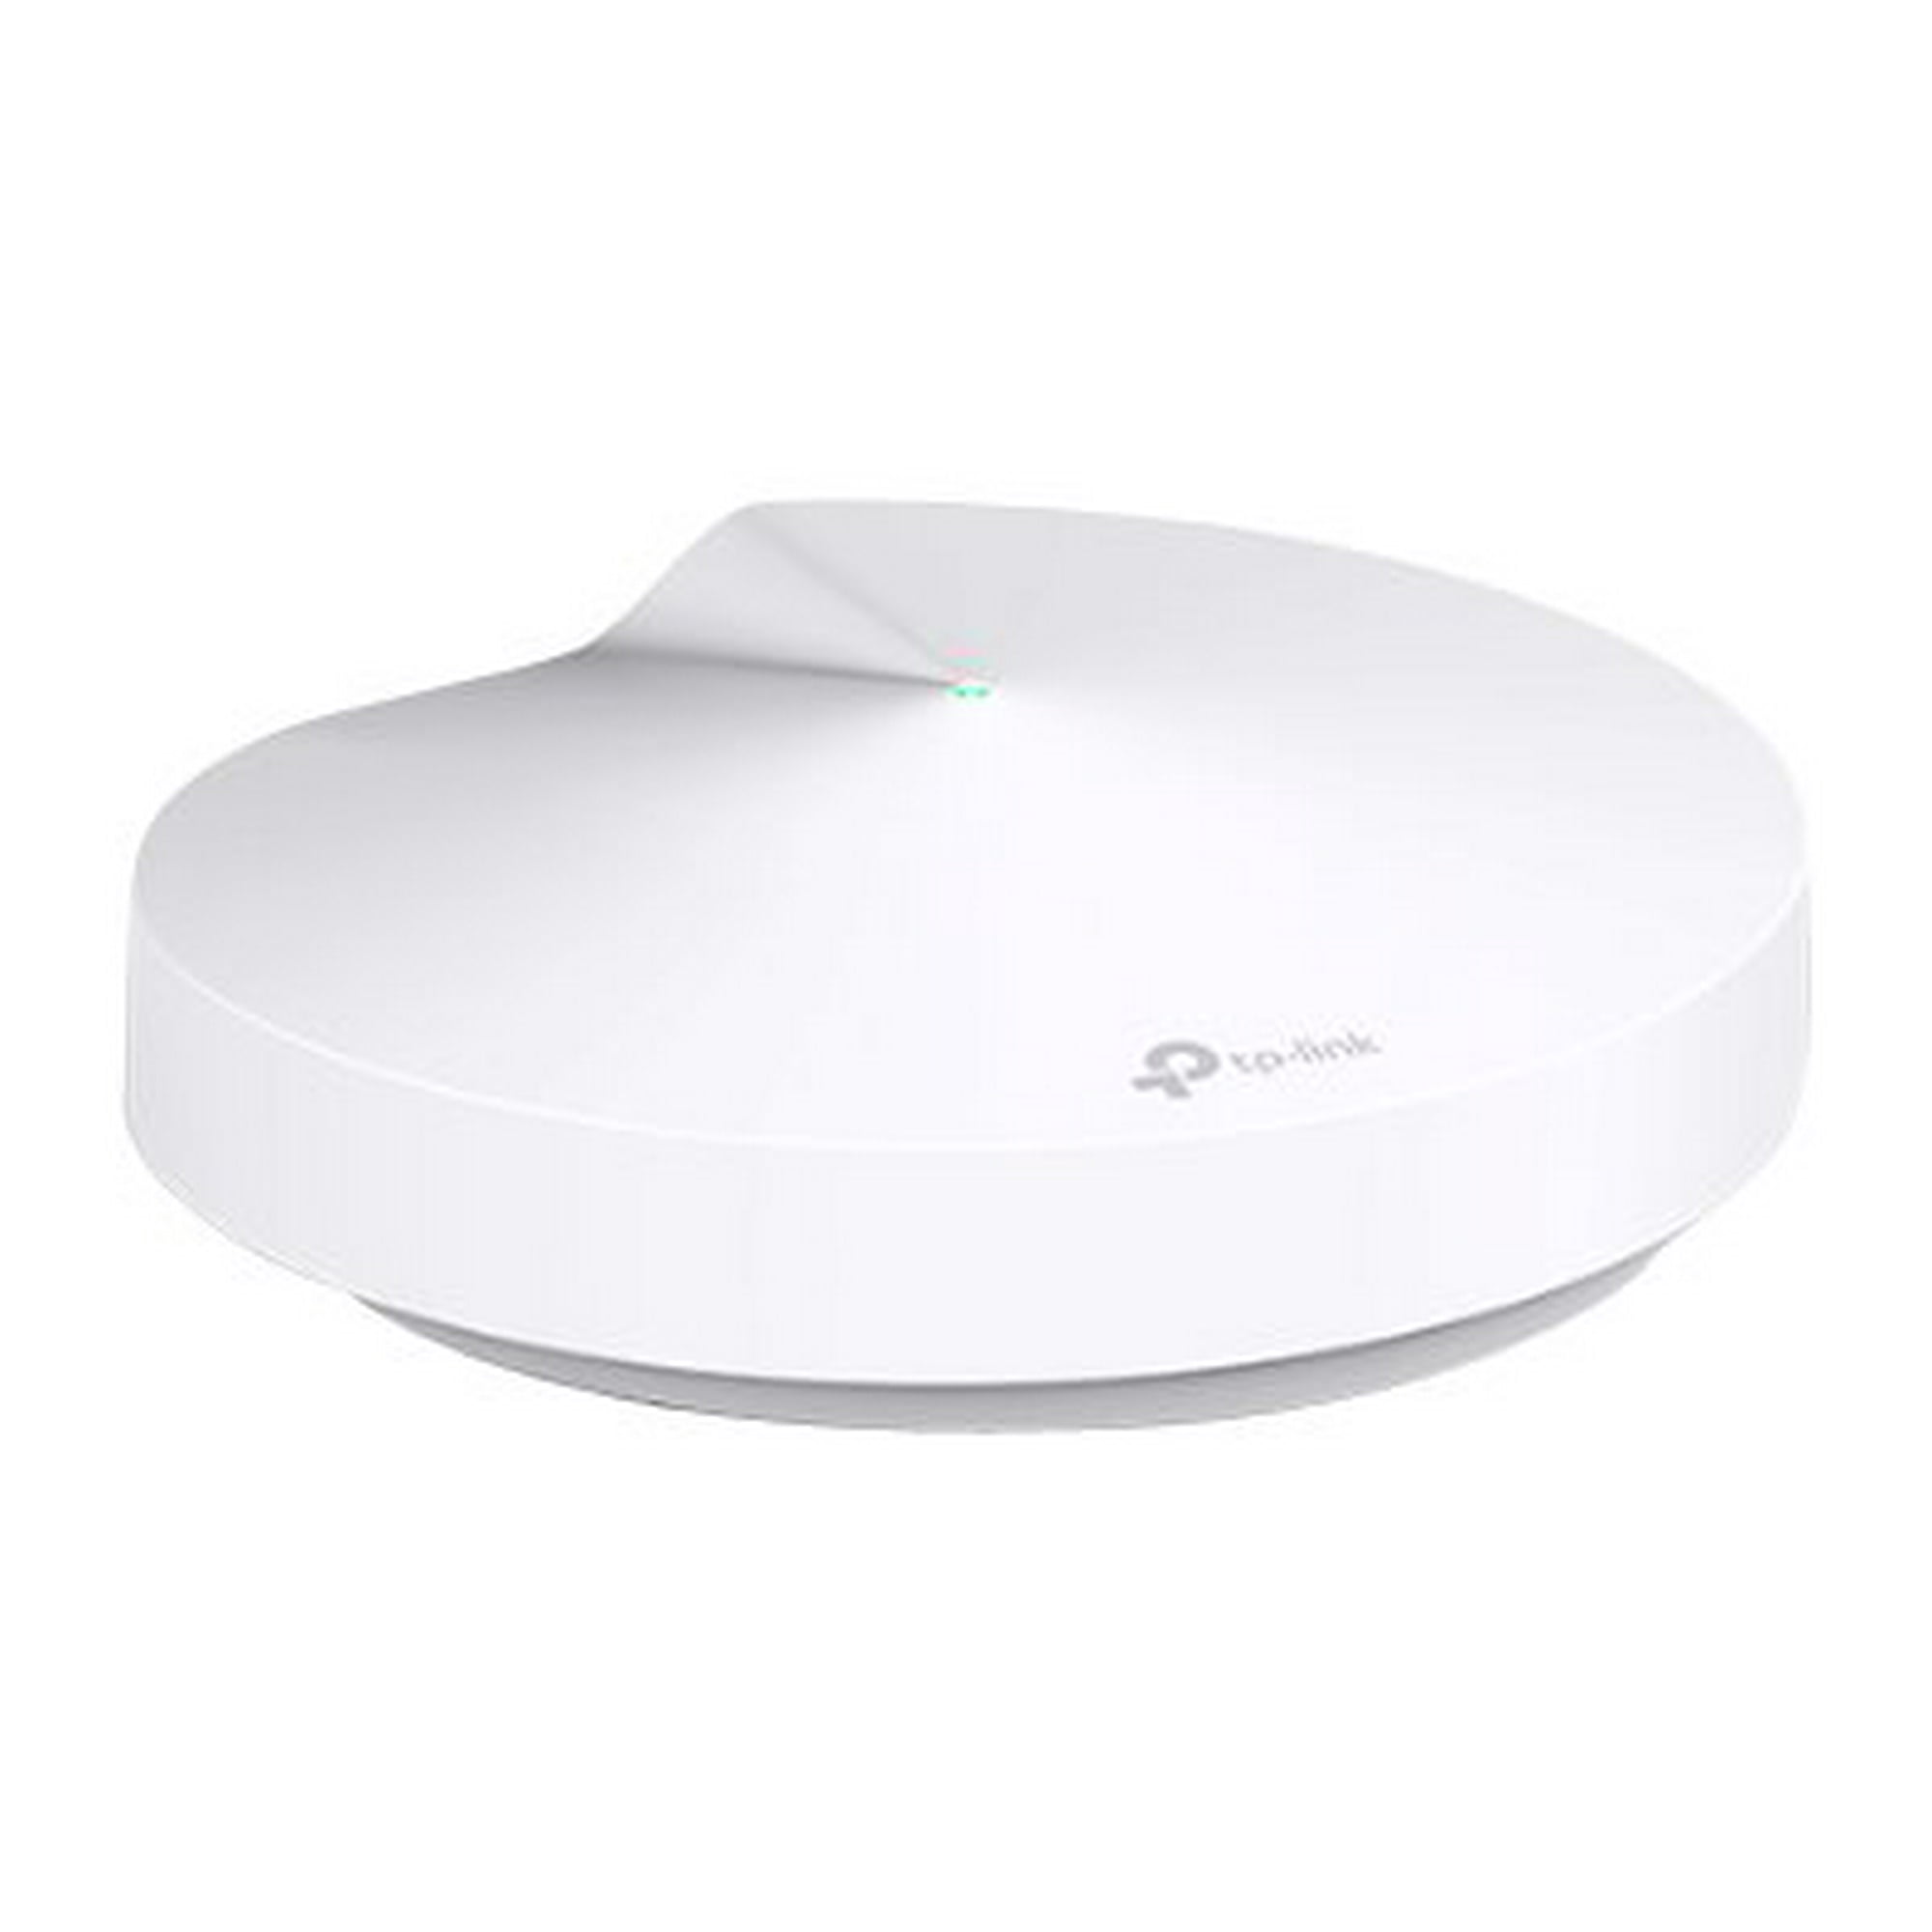 TP-Link DECO M5 - Wi-Fi system (2 routers) - up to 4,500 sq.ft